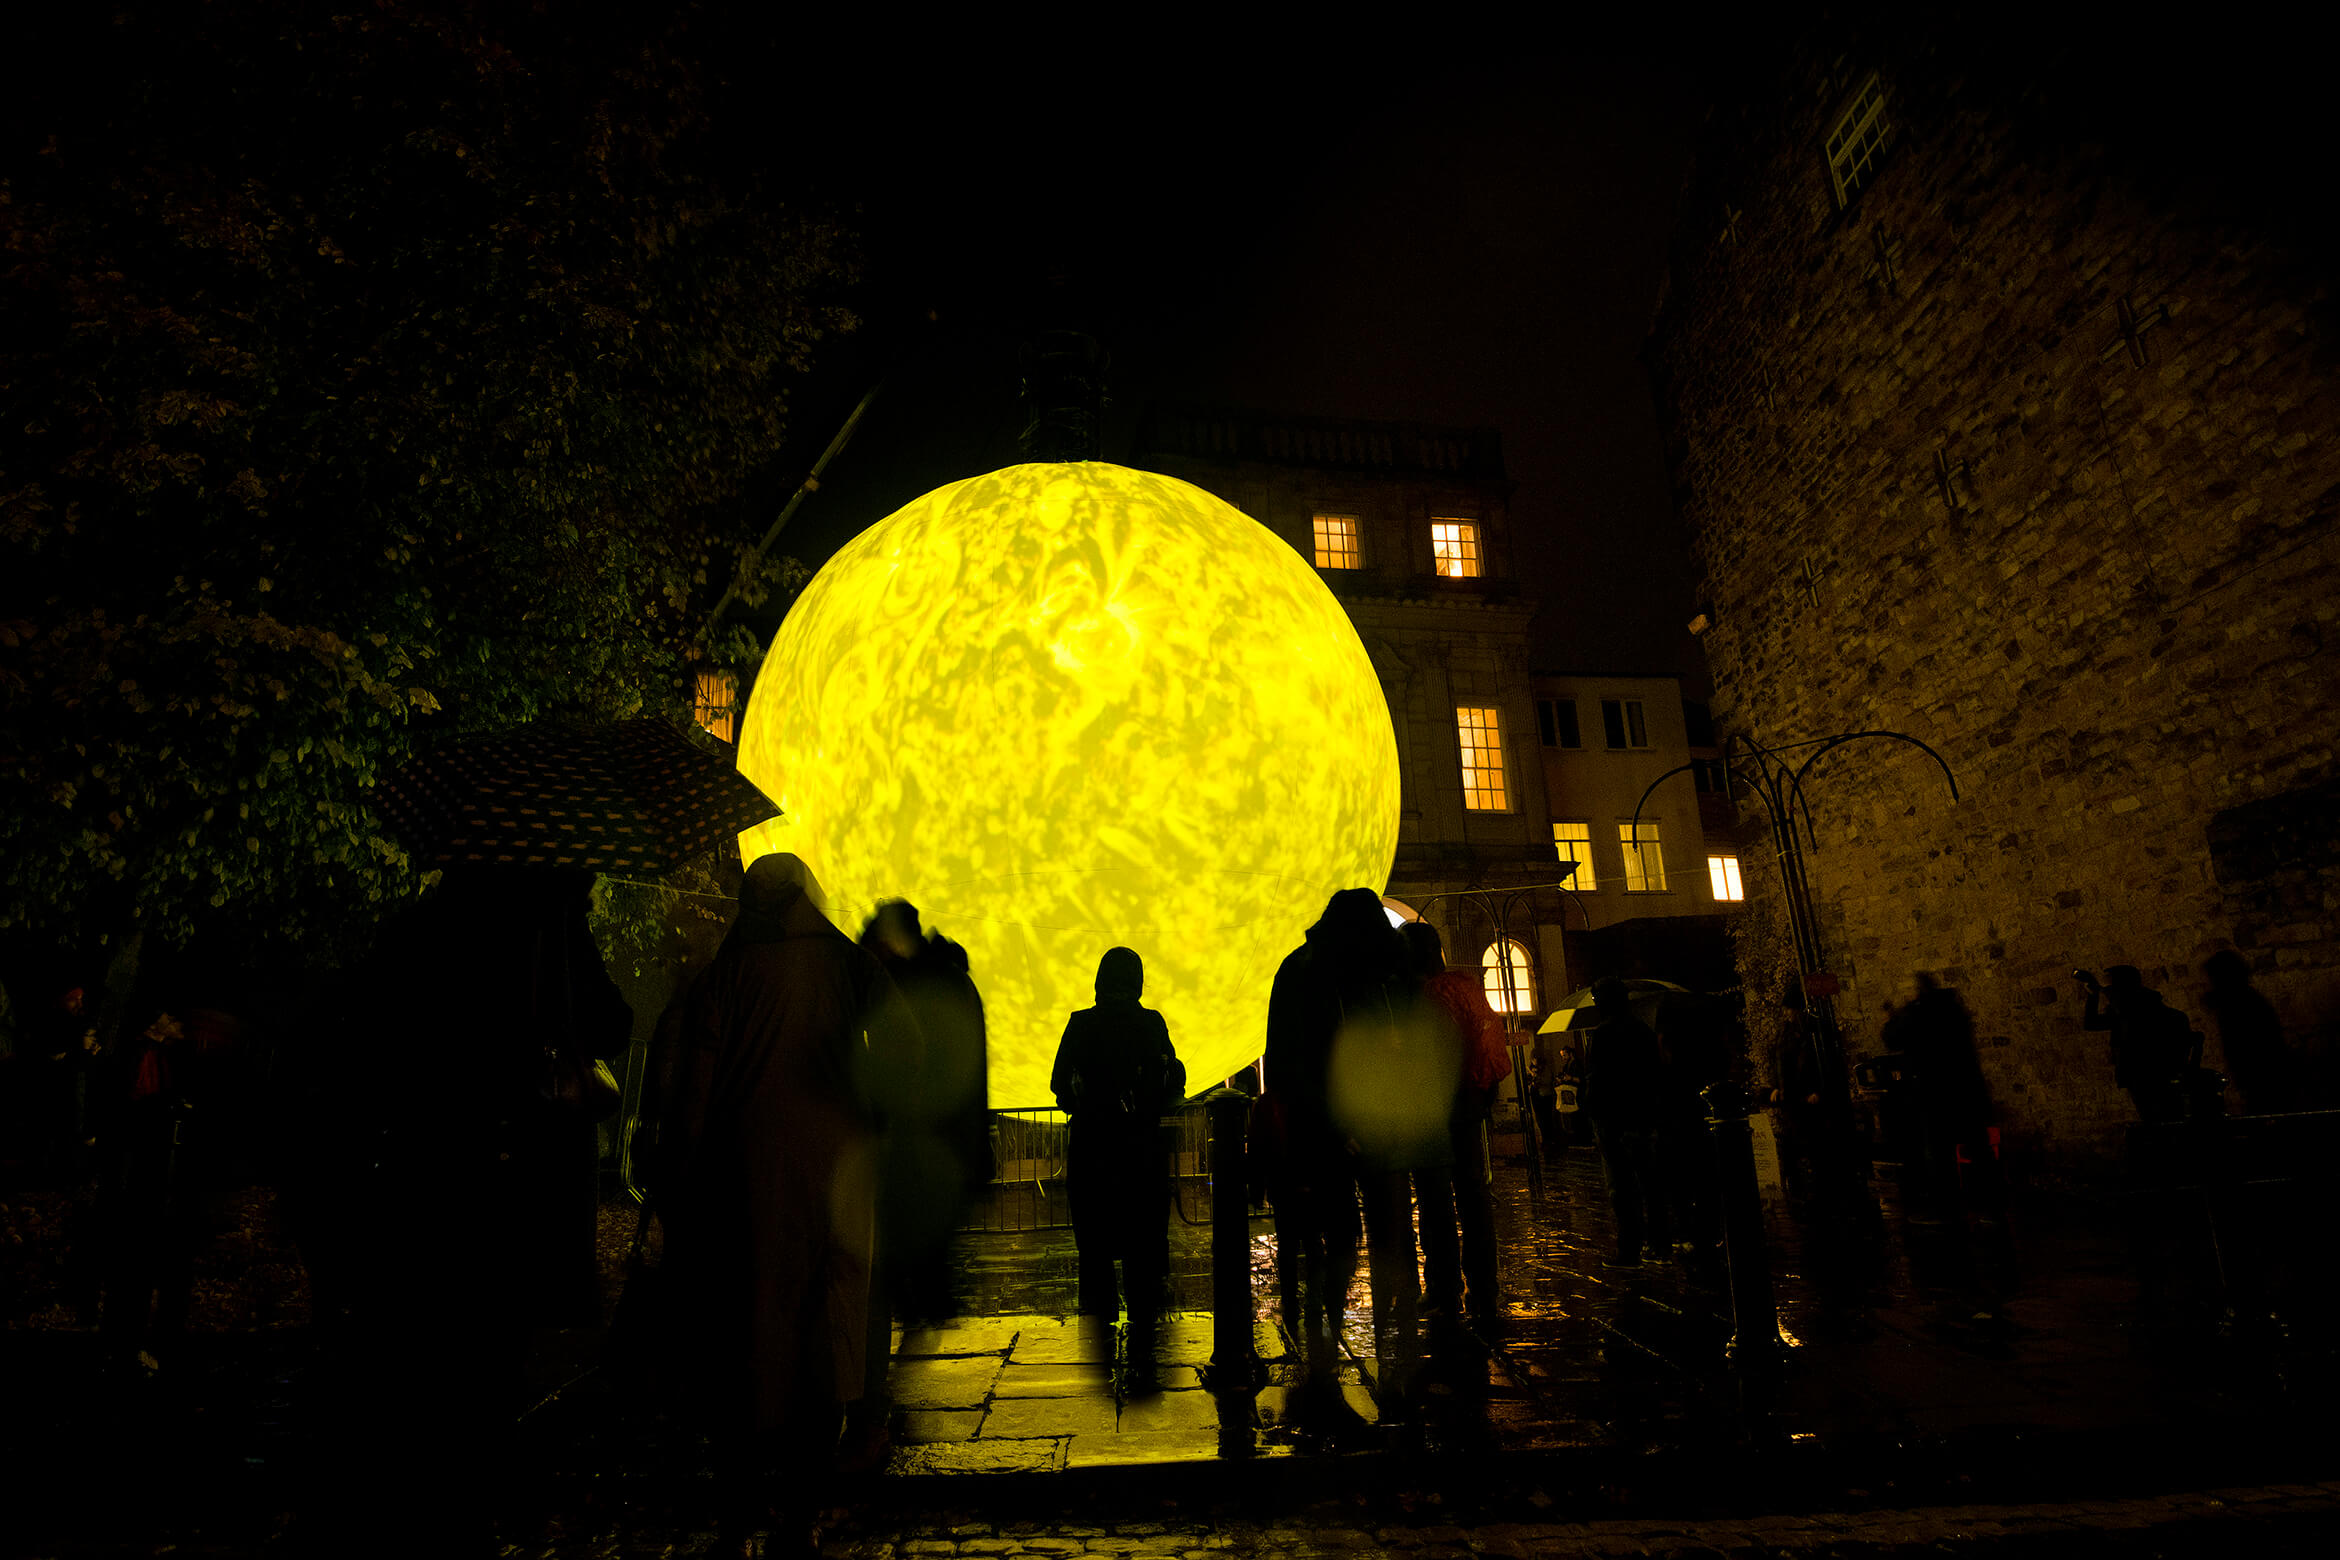 Photograph of SUN taken outside at night and showing in a group of people watching it